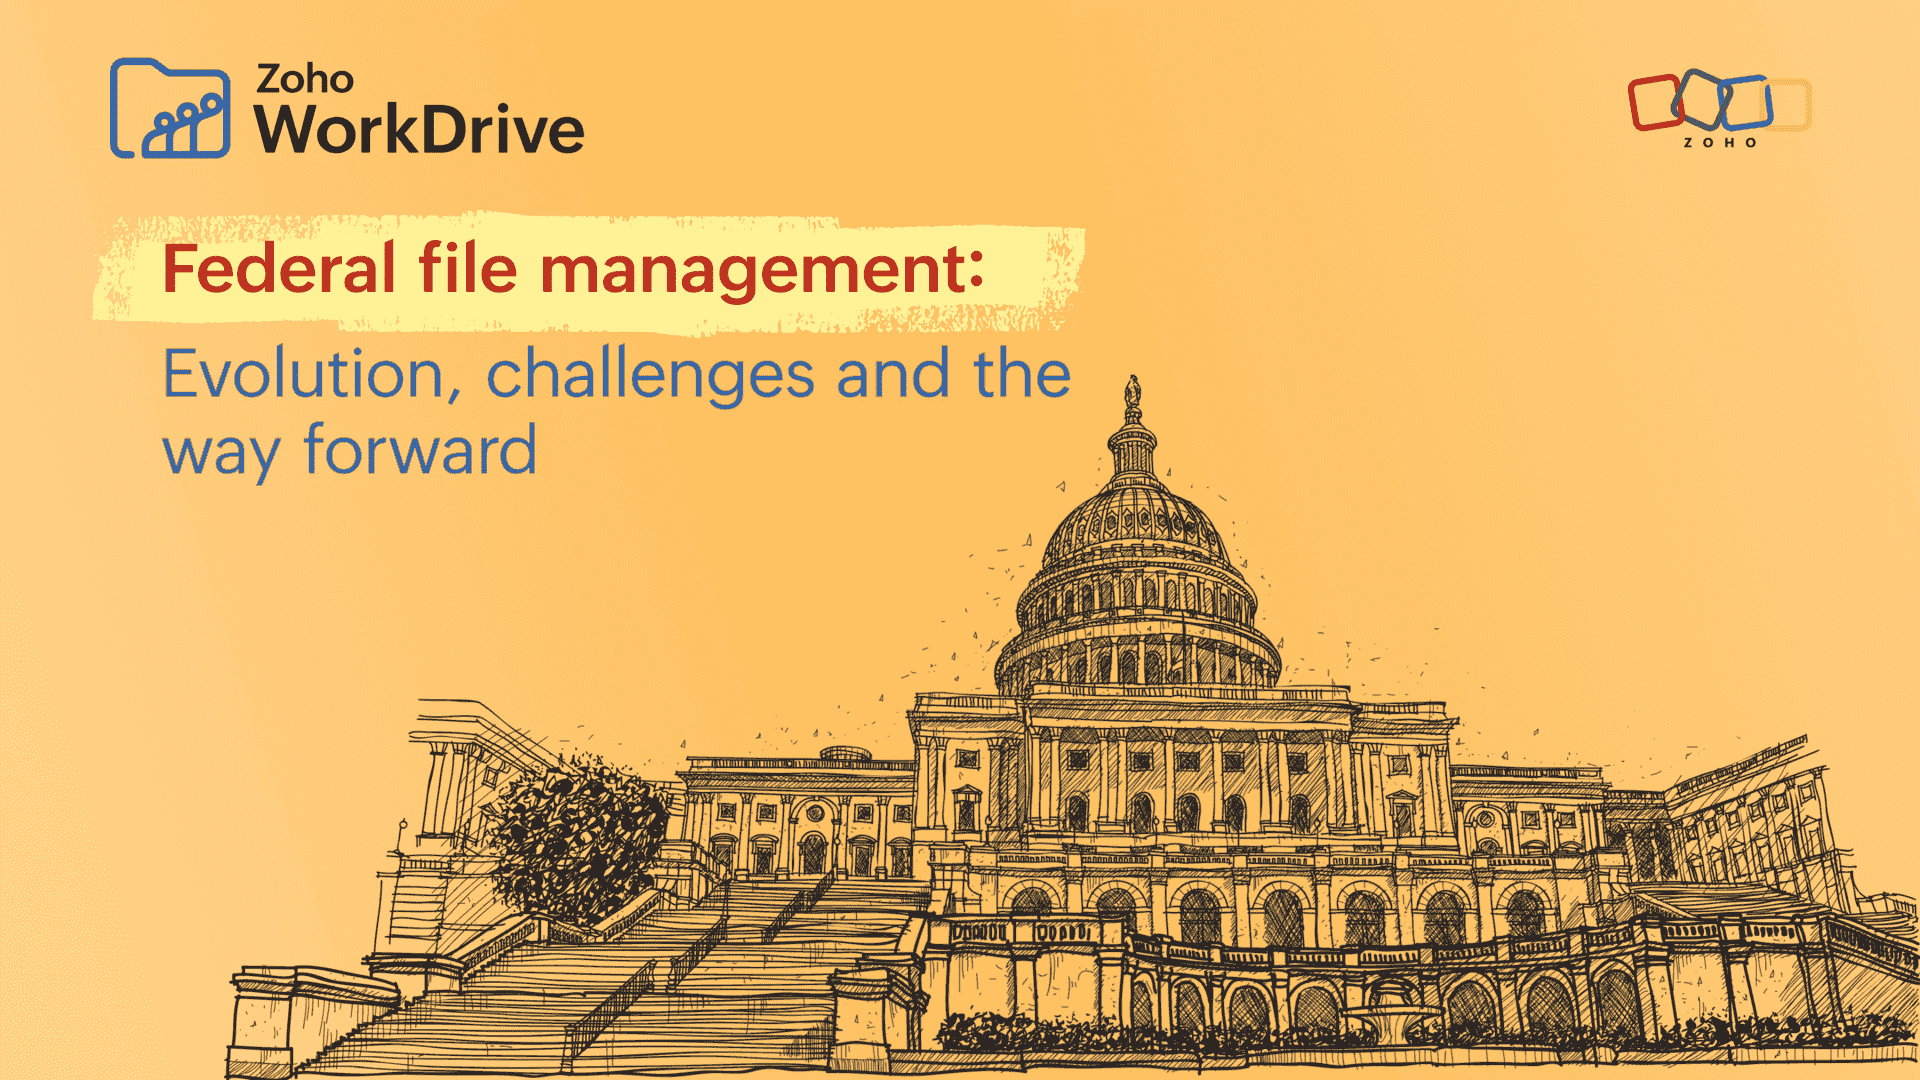 Challenges in Federal file management and the opportunities in the cloud.